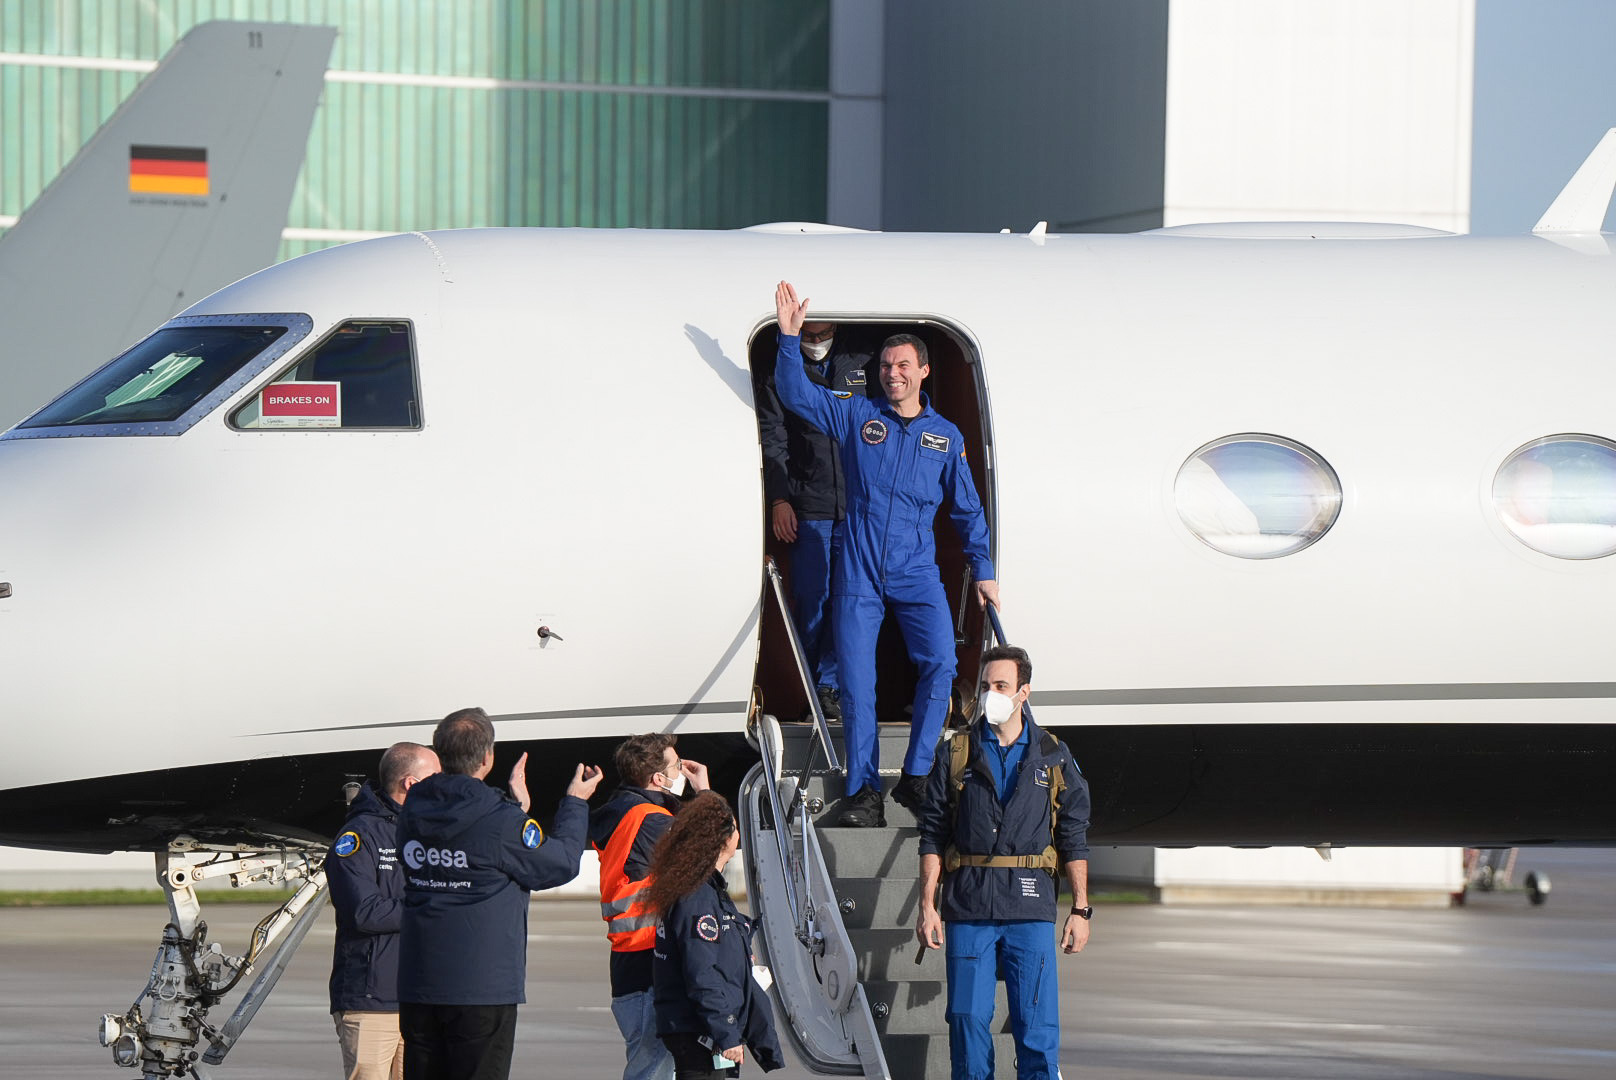 ESA project astronaut Marcus Wandt returned from space